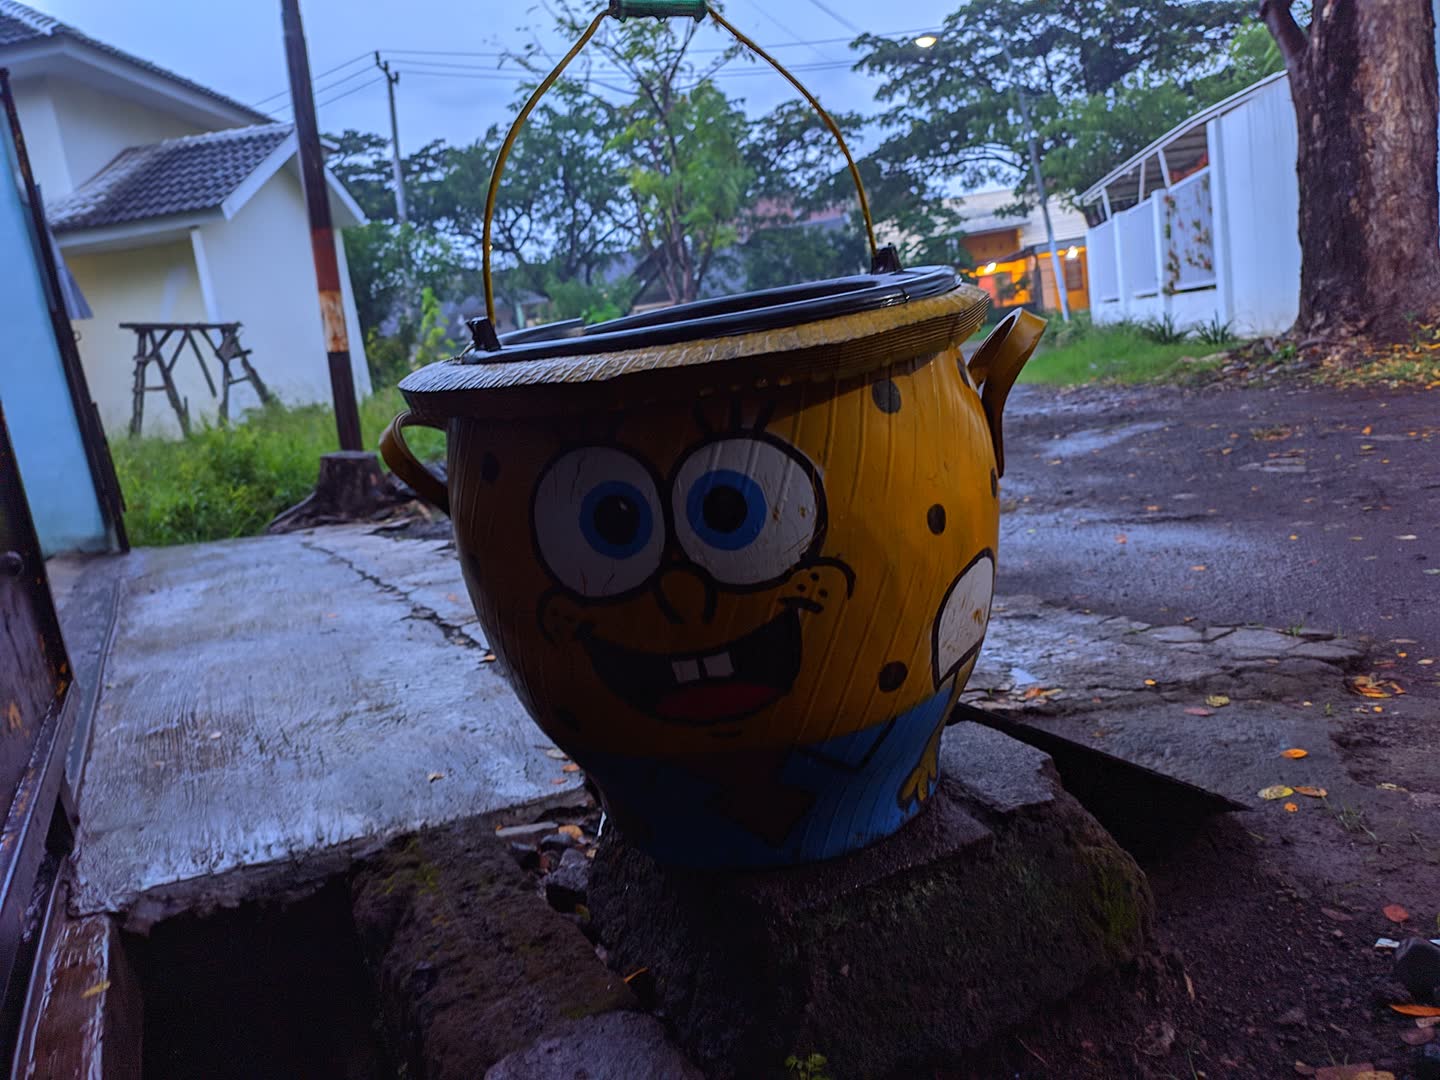 spongebob trash can on a cold and rainy evening